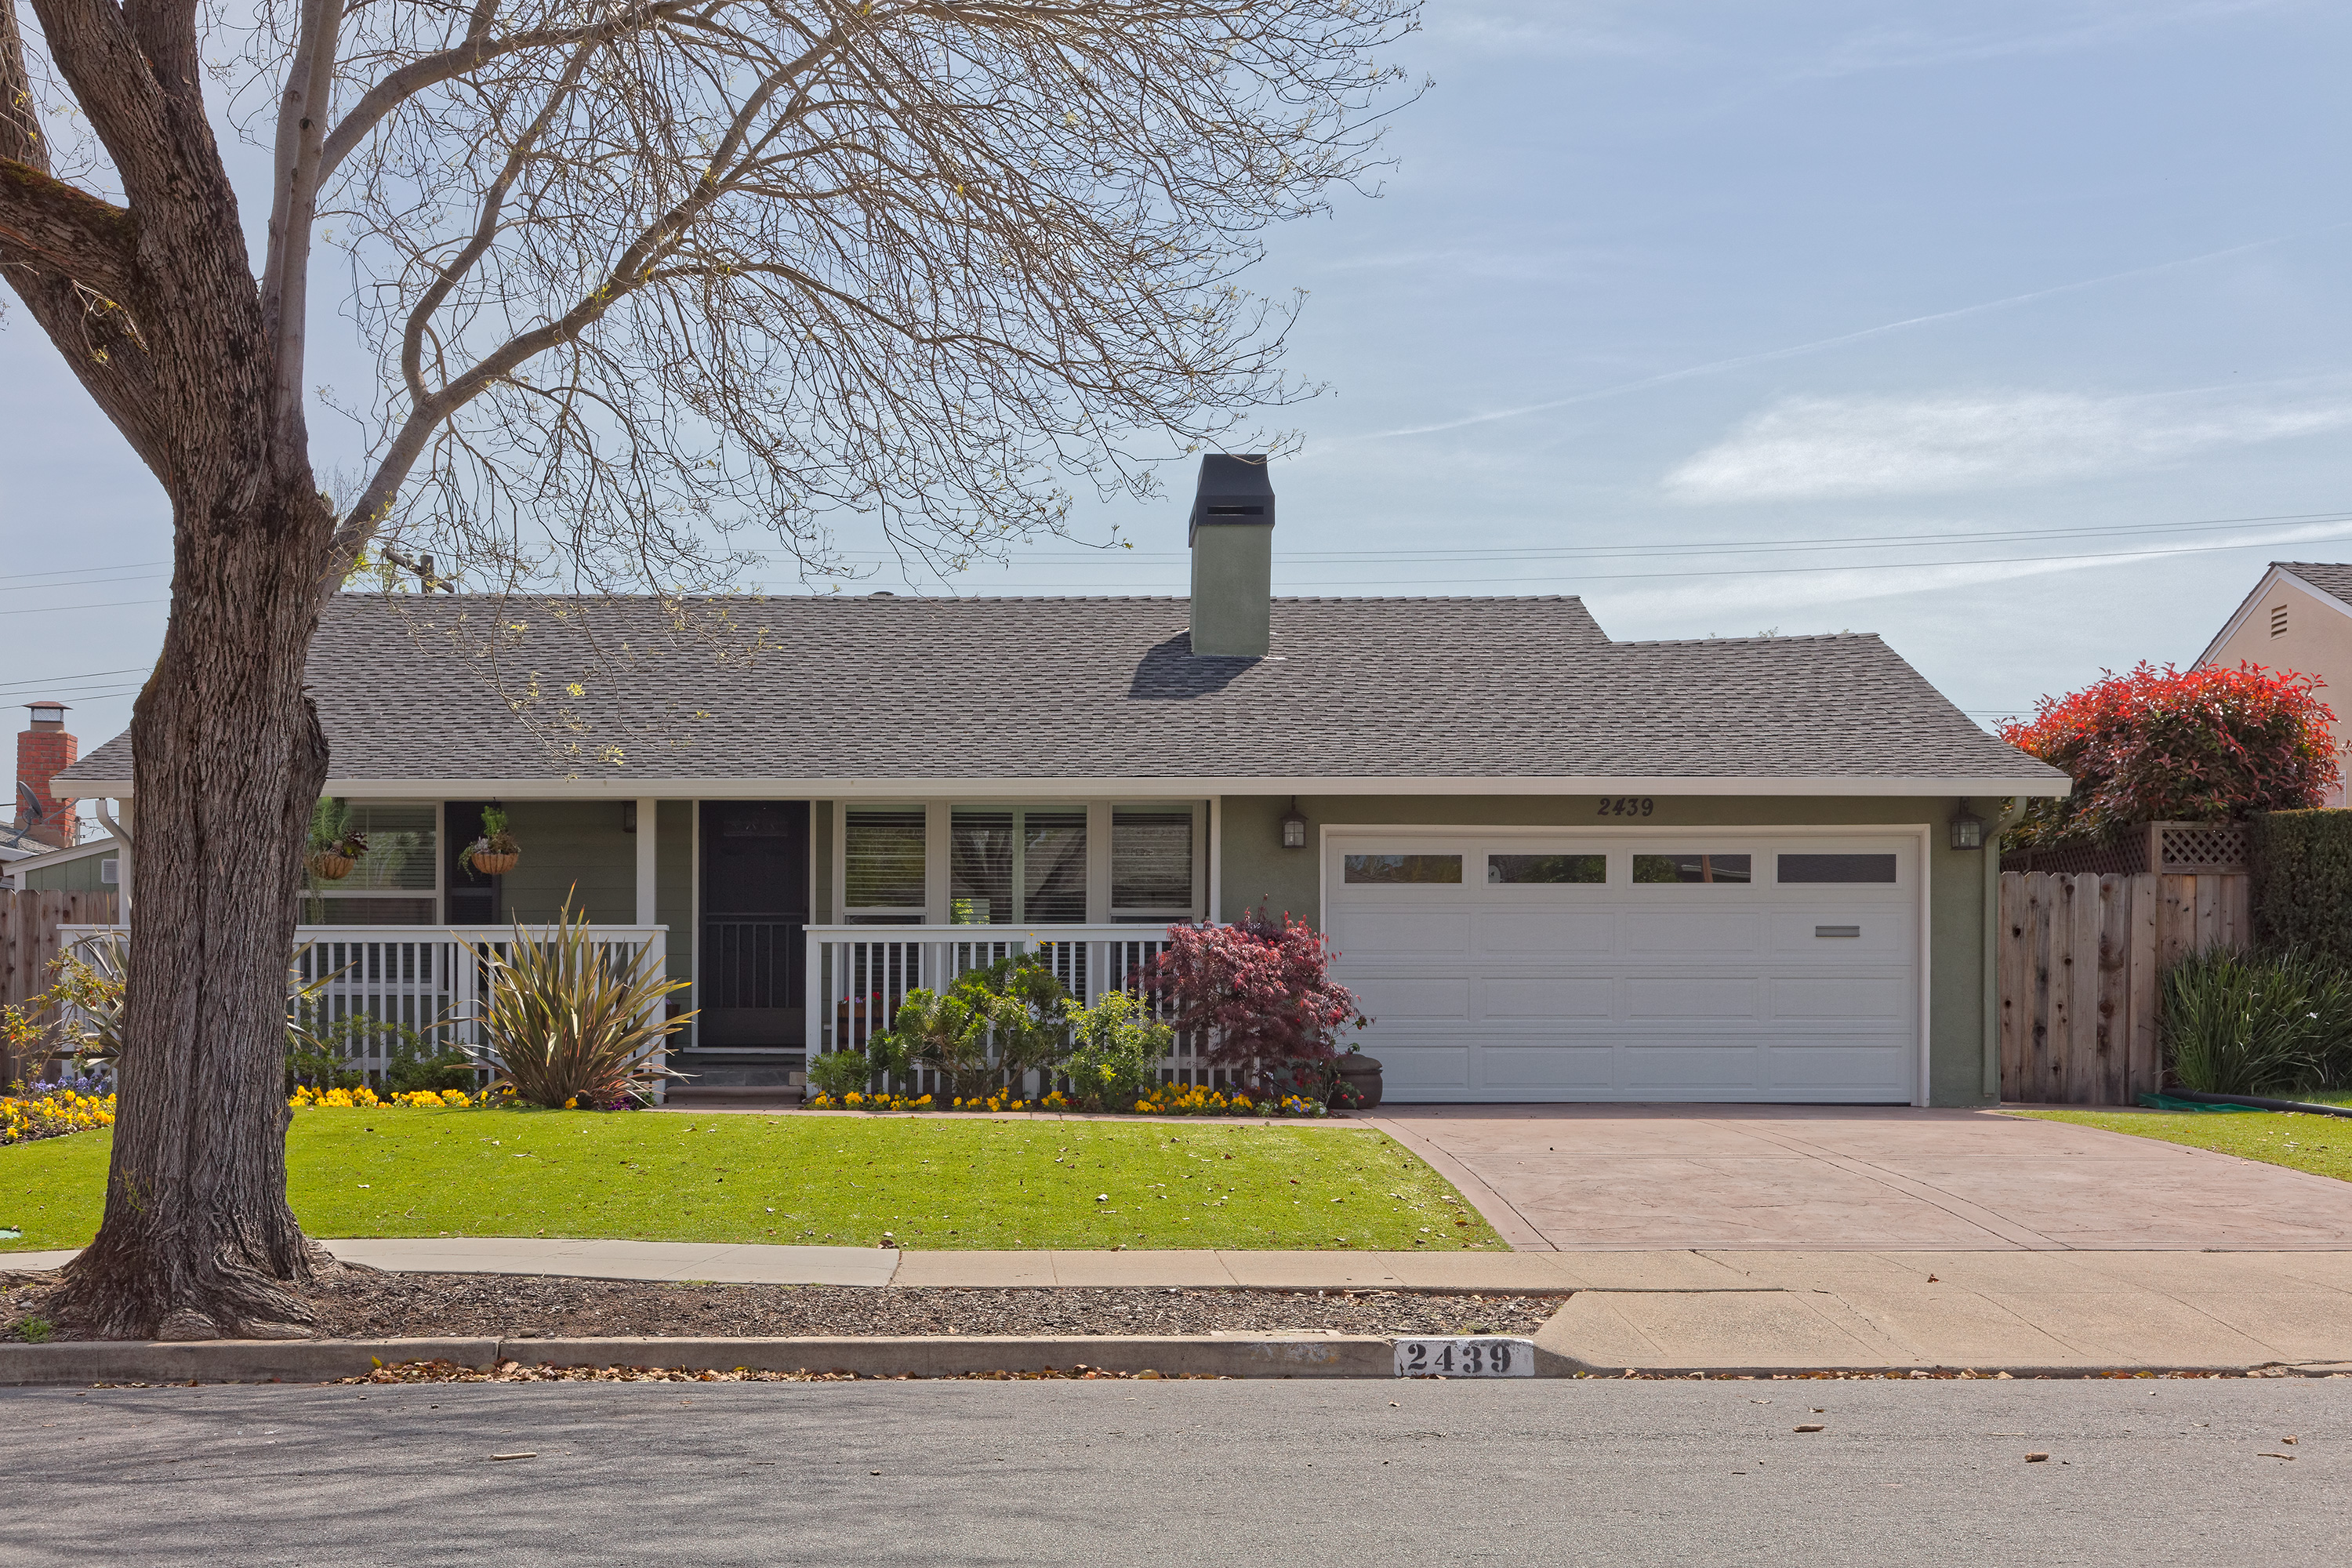 2439 Goodwin Ave, Redwood City 94061 - Goodwin Ave 2439 